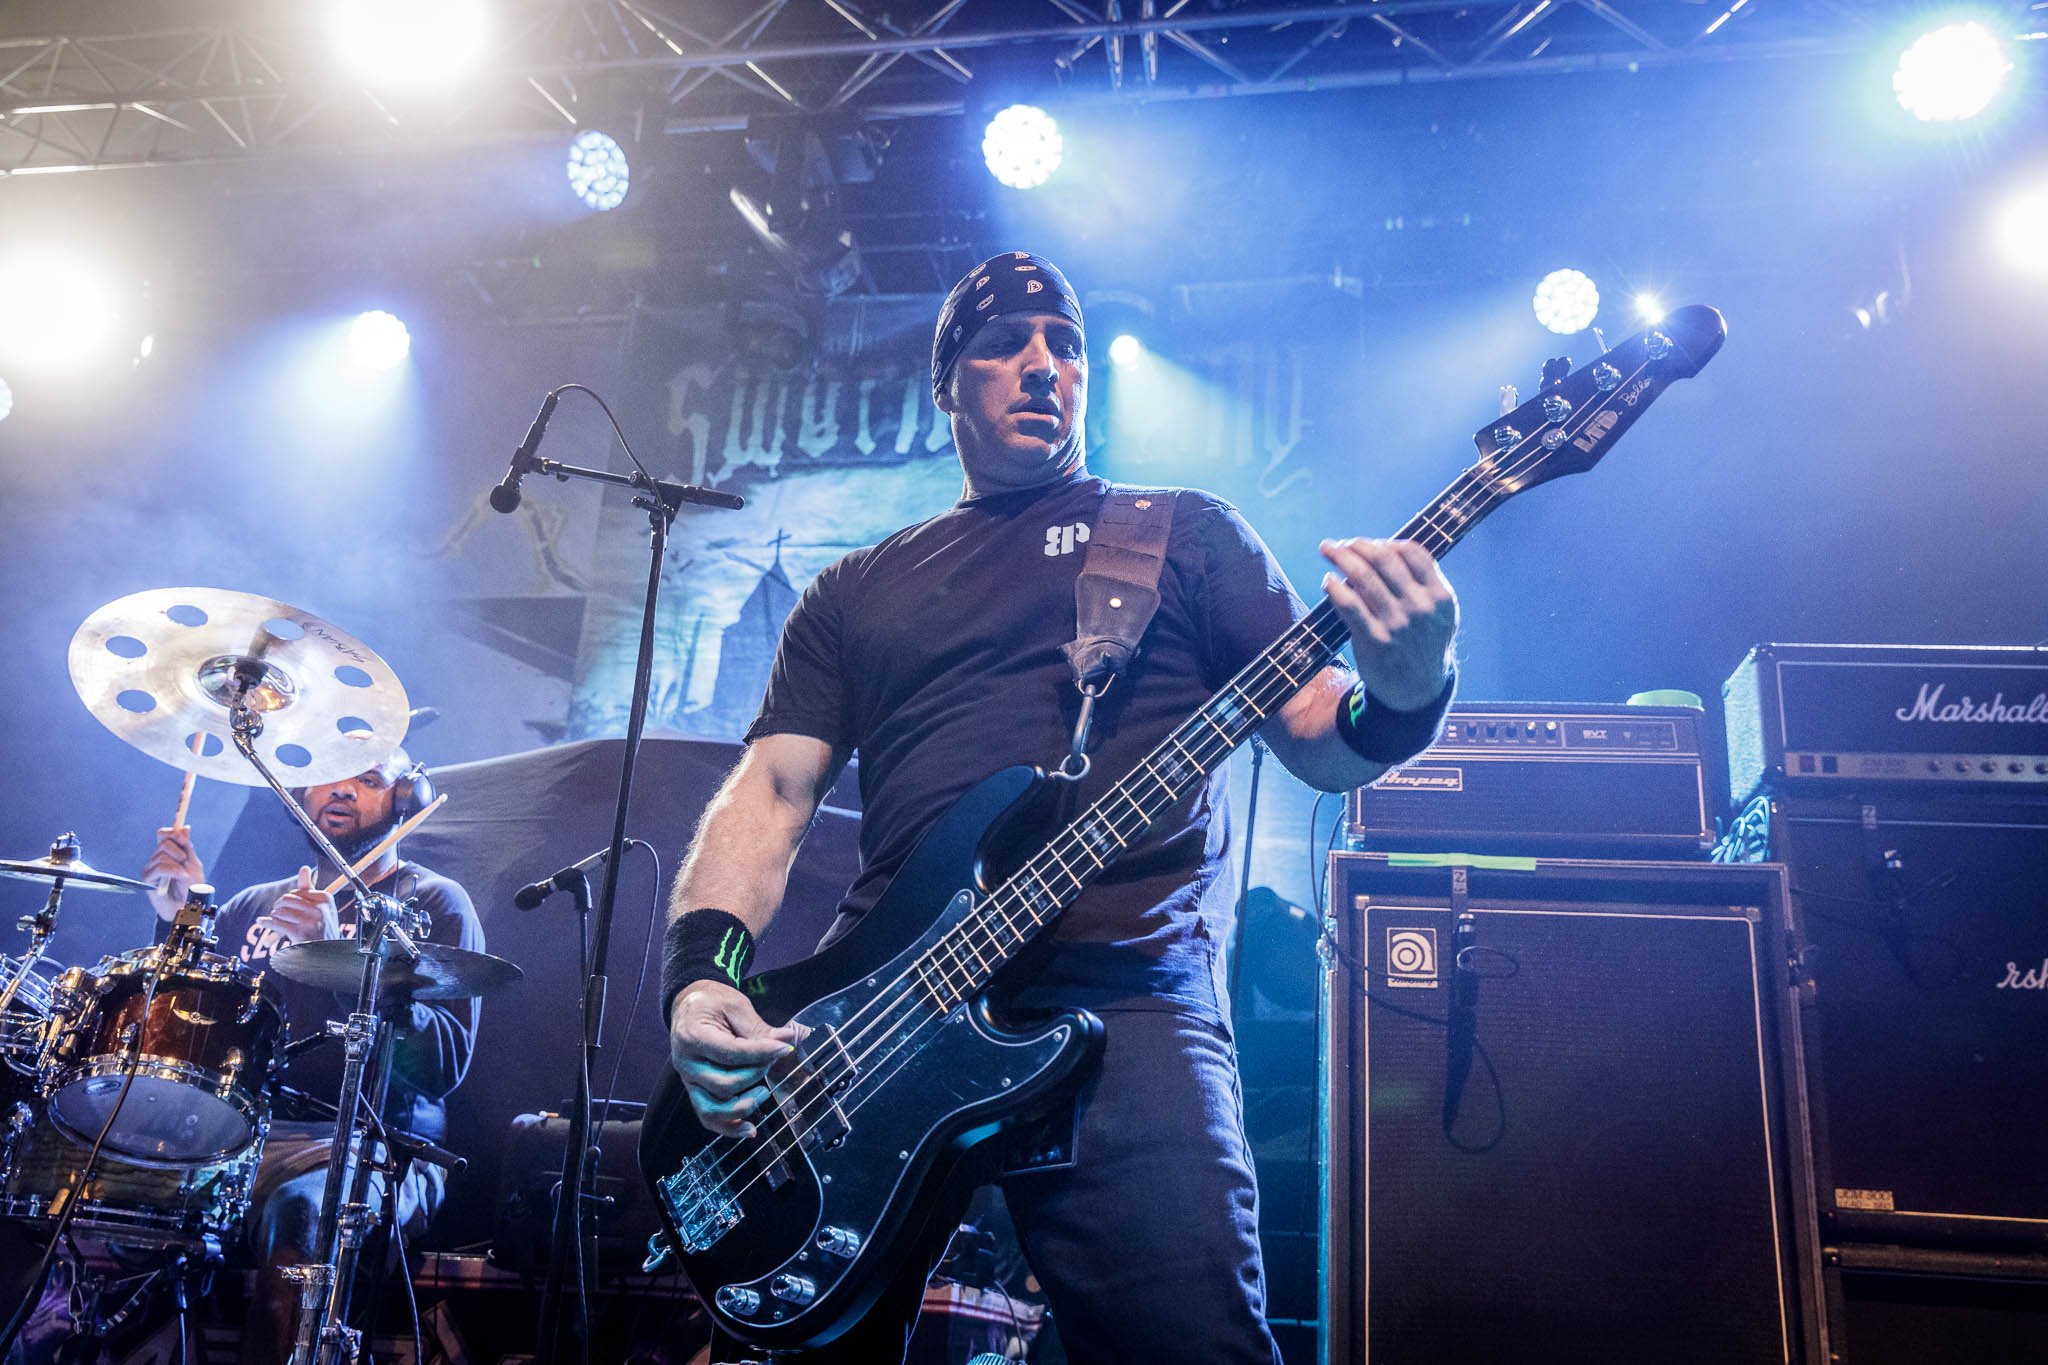 Sworn Enemy at the Academy in Manchester on September 29th 2022 